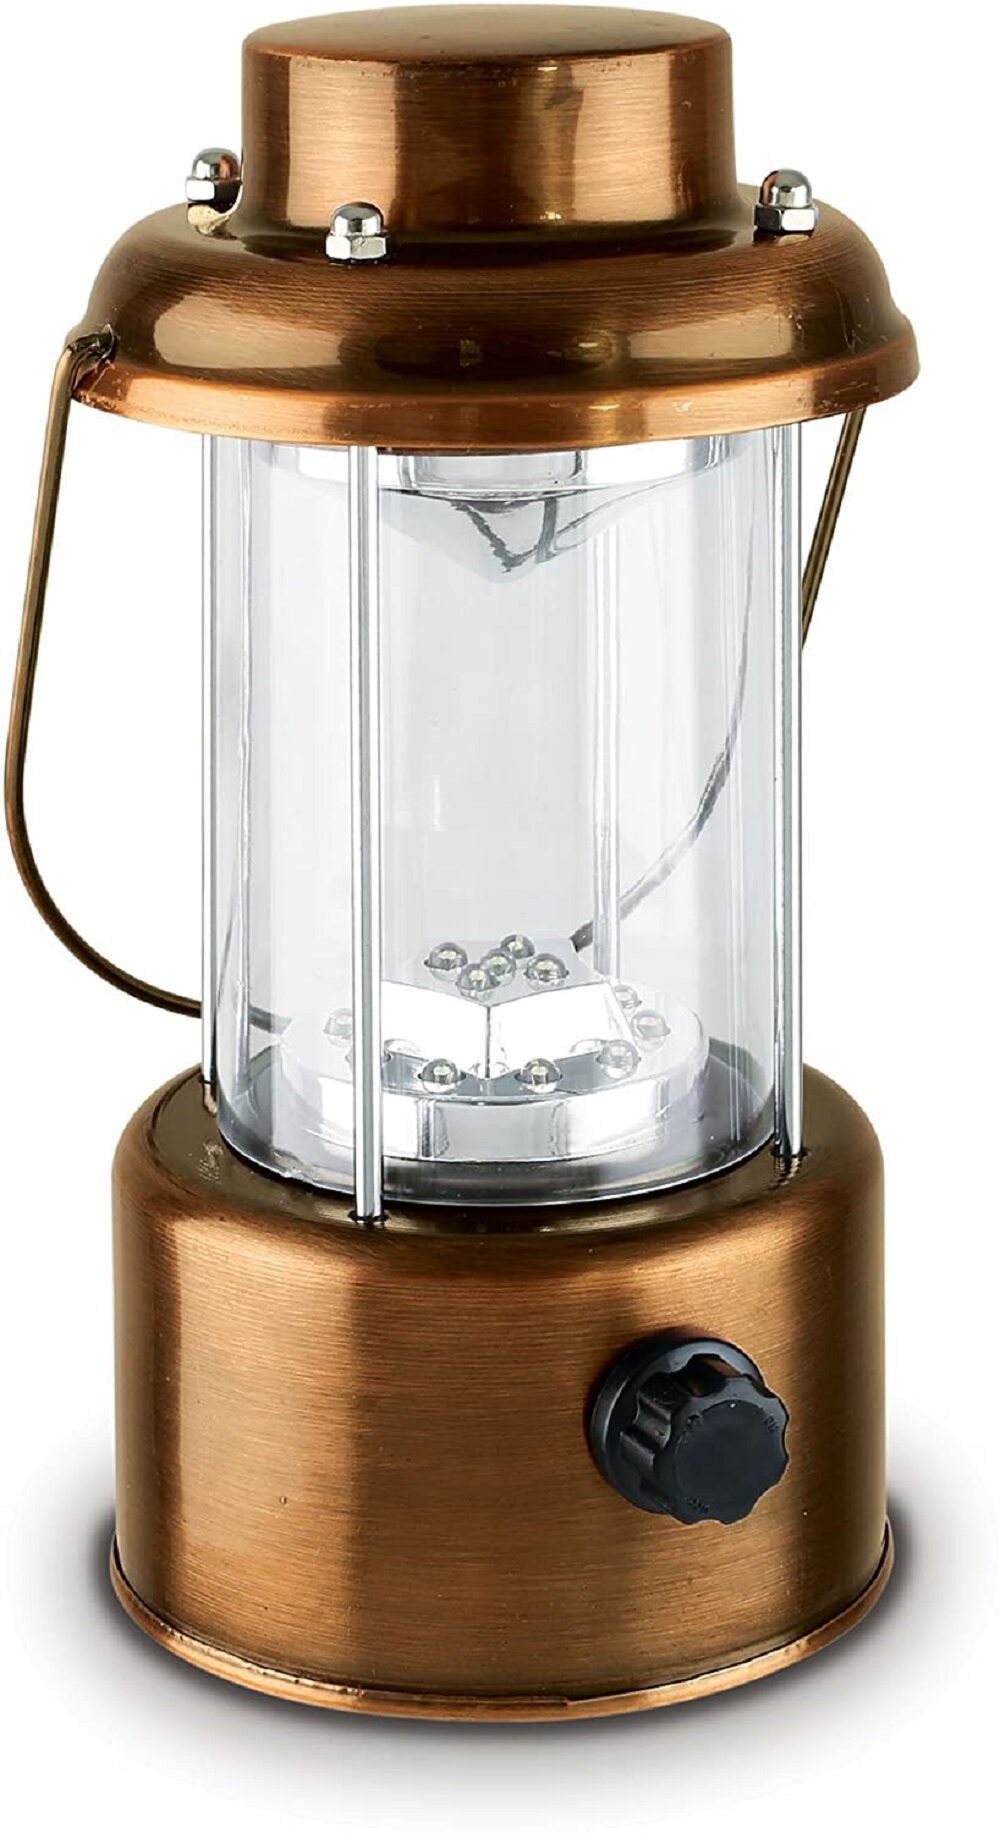 18 LED Camping Lantern with Fan - Stansport